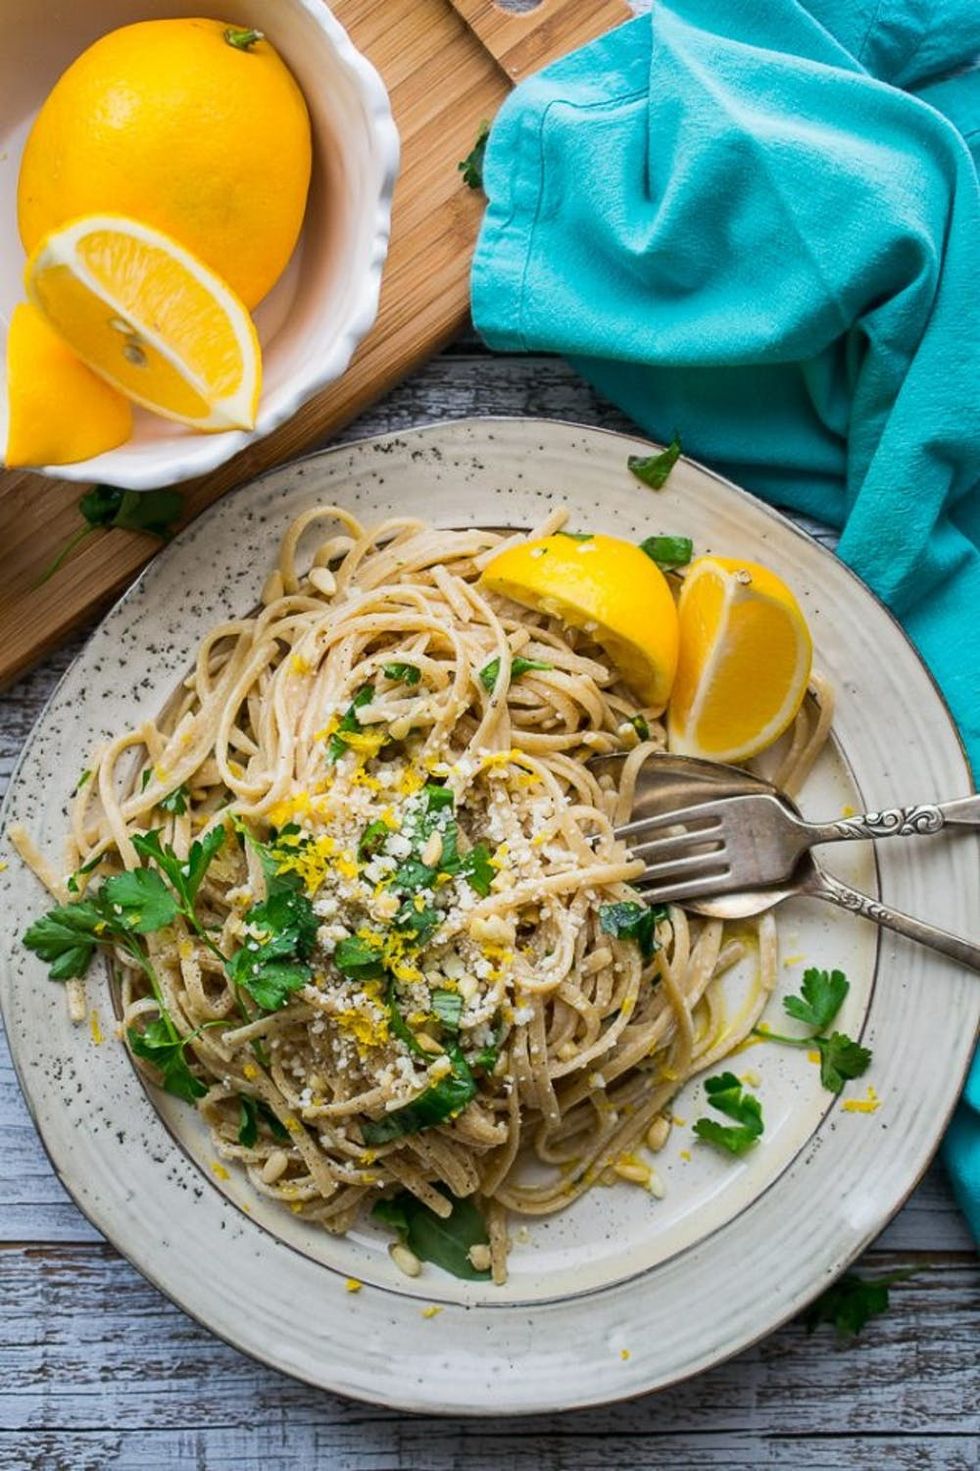 15 Romantically Simple Pasta Dinners That Scream “That’s Amore!” - Brit